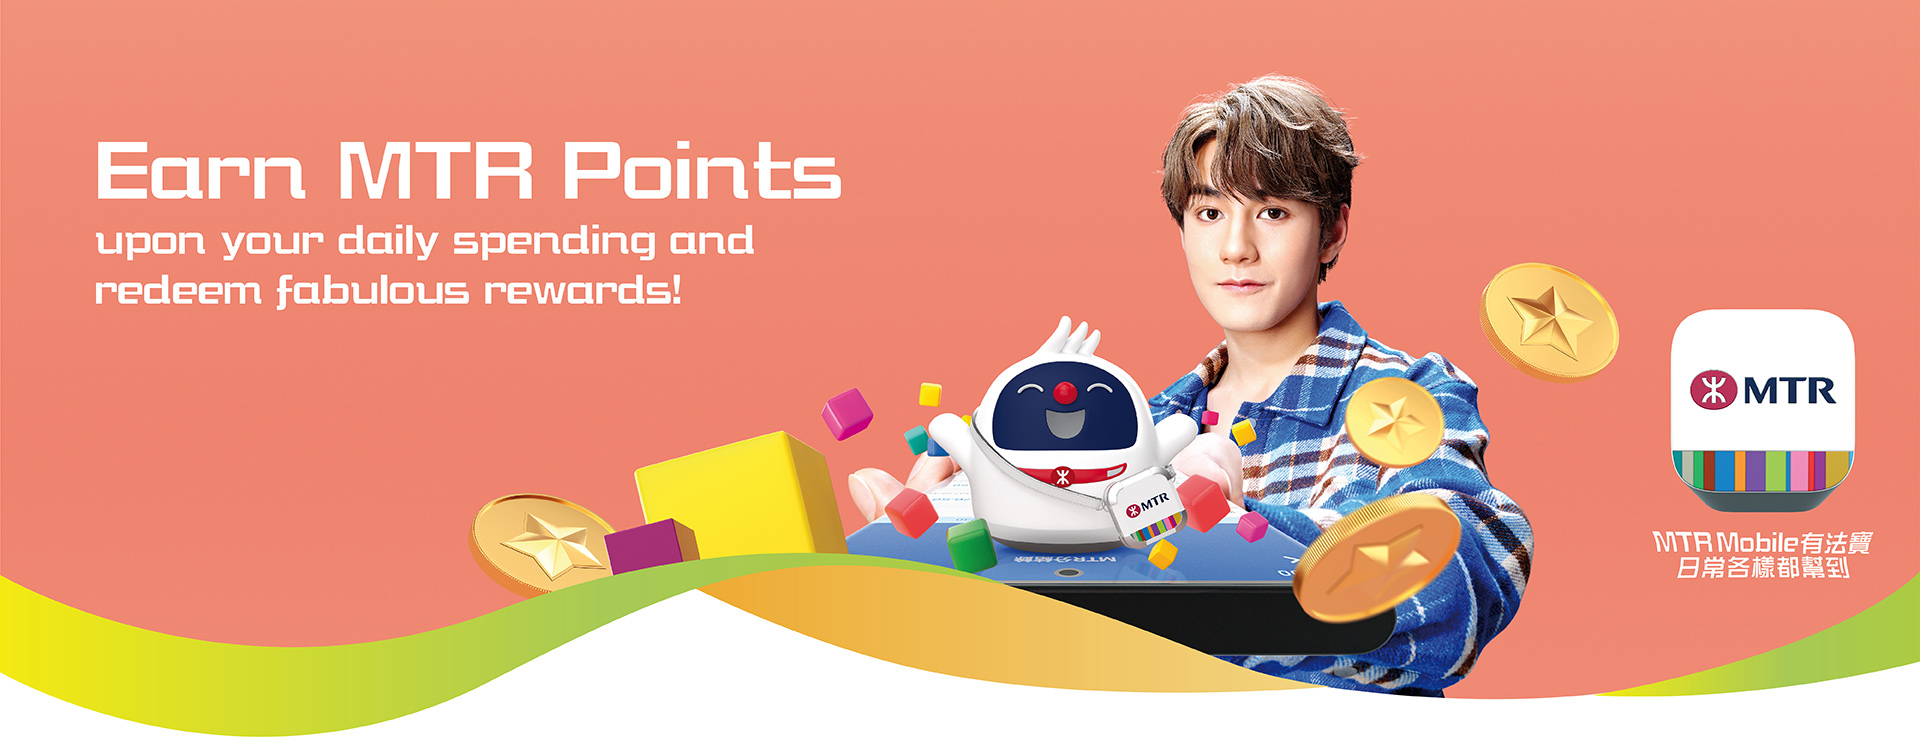 Earn MTR Points upon your daily spending and redeem fabulous rewards!